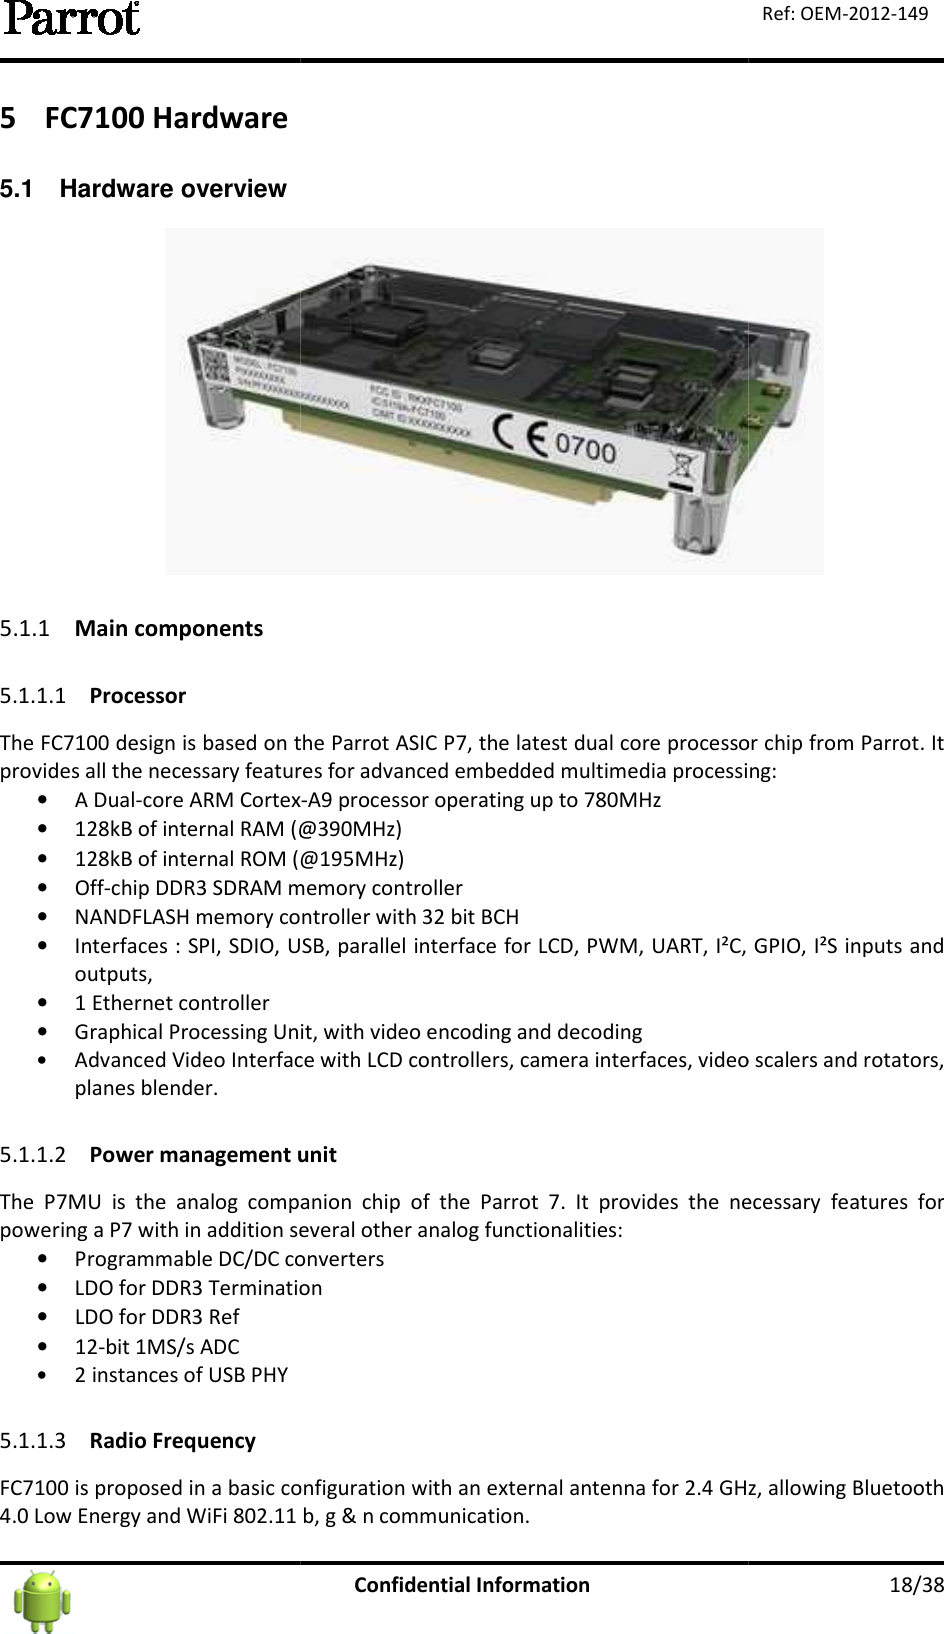   5 FC7100 Hardware 5.1  Hardware overview 5.1.1 Main components 5.1.1.1 Processor The FC7100 design is based on the Parrot Aprovides all the necessary features for advanced embedded multimedia processing:• A Dual-core ARM Cortex• 128kB of internal RAM (@390MHz)• 128kB of internal ROM (@195MHz)• Off-chip DDR3 SDRAM memory controller• NANDFLASH memory controller with 32 bit BCH• Interfaces : SPI, SDIO, USB, parallel interface for LCD, PWM, UART, I²C, GPIO, I²S inputs and outputs,  • 1 Ethernet controller • Graphical Processing Unit, with video • Advanced Video Interface with LCD controllers, camera interfaces, video scalers and rotators, planes blender.  5.1.1.2 Power management unitThe  P7MU  is  the  analog  companion  chip  of  the  Parrot  7.  It  provides  the  necessary  features  for powering a P7 with in addition several other analog functionalities:• Programmable DC/DC converters• LDO for DDR3 Termination• LDO for DDR3 Ref • 12-bit 1MS/s ADC • 2 instances of USB PHY  5.1.1.3 Radio Frequency FC7100 is proposed in a basic configuration with an external ante4.0 Low Energy and WiFi 802.11 Confidential Information   The FC7100 design is based on the Parrot ASIC P7, the latest dual core processor chip from Parrot. It provides all the necessary features for advanced embedded multimedia processing:core ARM Cortex-A9 processor operating up to 780MHz 128kB of internal RAM (@390MHz) (@195MHz) chip DDR3 SDRAM memory controller NANDFLASH memory controller with 32 bit BCH Interfaces : SPI, SDIO, USB, parallel interface for LCD, PWM, UART, I²C, GPIO, I²S inputs and Graphical Processing Unit, with video encoding and decoding Advanced Video Interface with LCD controllers, camera interfaces, video scalers and rotators, Power management unit The  P7MU  is  the  analog  companion  chip  of  the  Parrot  7.  It  provides  the  necessary  features  for g a P7 with in addition several other analog functionalities: Programmable DC/DC converters LDO for DDR3 Termination  FC7100 is proposed in a basic configuration with an external antenna for 2.4 GHz, allowing Bluetooth  b, g &amp; n communication.    18/38 Ref: OEM-2012-149  P7, the latest dual core processor chip from Parrot. It provides all the necessary features for advanced embedded multimedia processing: Interfaces : SPI, SDIO, USB, parallel interface for LCD, PWM, UART, I²C, GPIO, I²S inputs and Advanced Video Interface with LCD controllers, camera interfaces, video scalers and rotators, The  P7MU  is  the  analog  companion  chip  of  the  Parrot  7.  It  provides  the  necessary  features  for nna for 2.4 GHz, allowing Bluetooth 